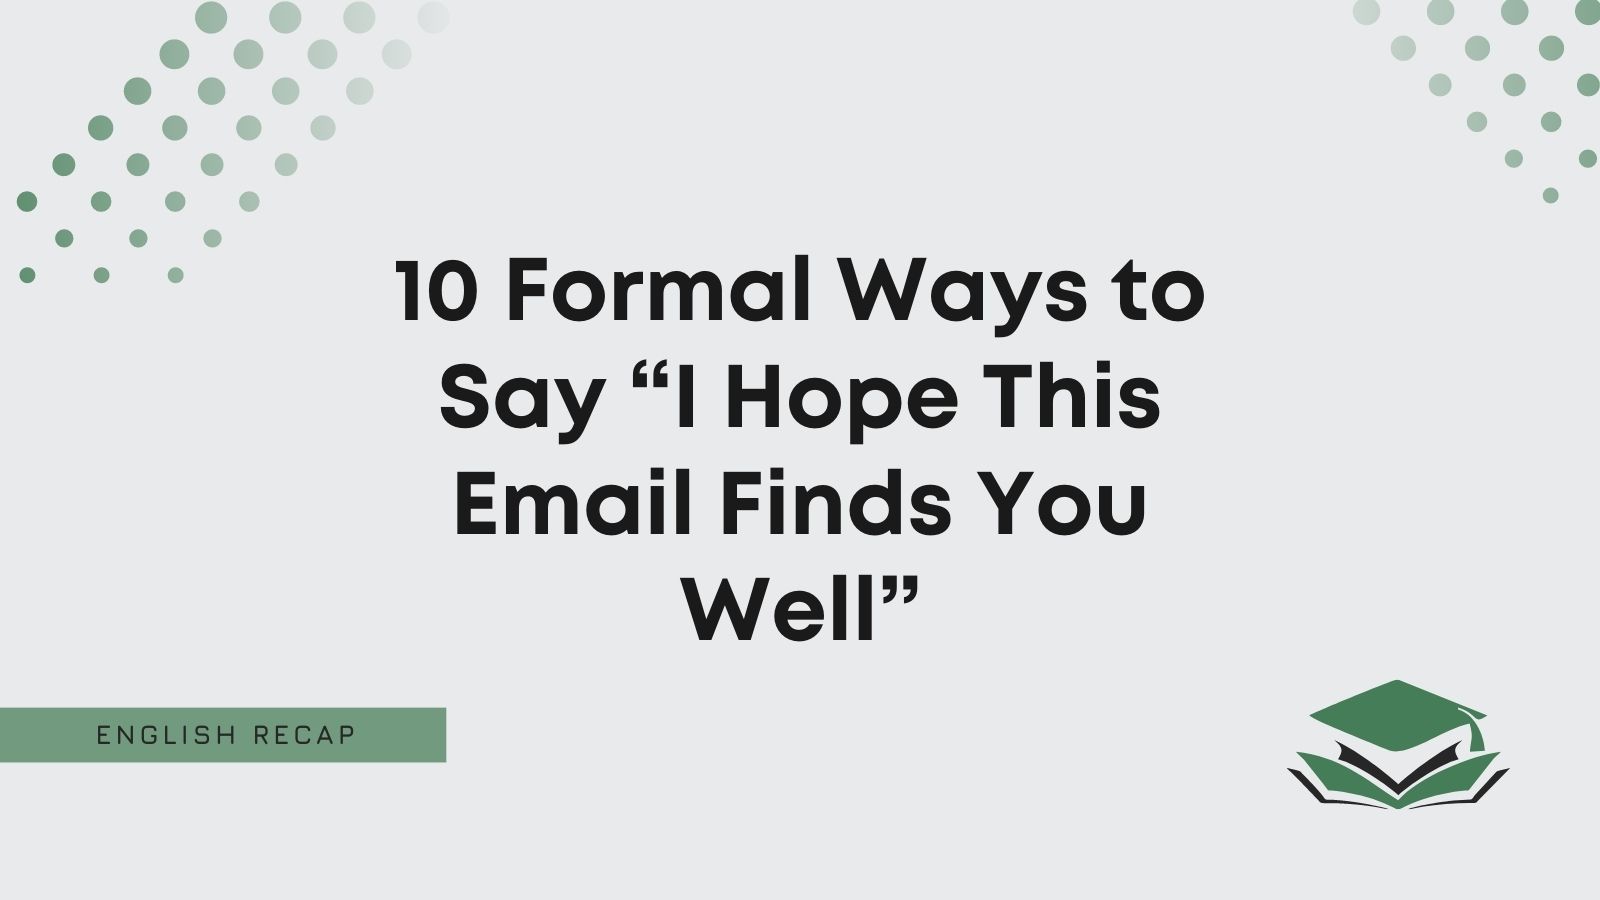 10 Formal Ways to Say “I Hope This Email Finds You Well” - English Recap